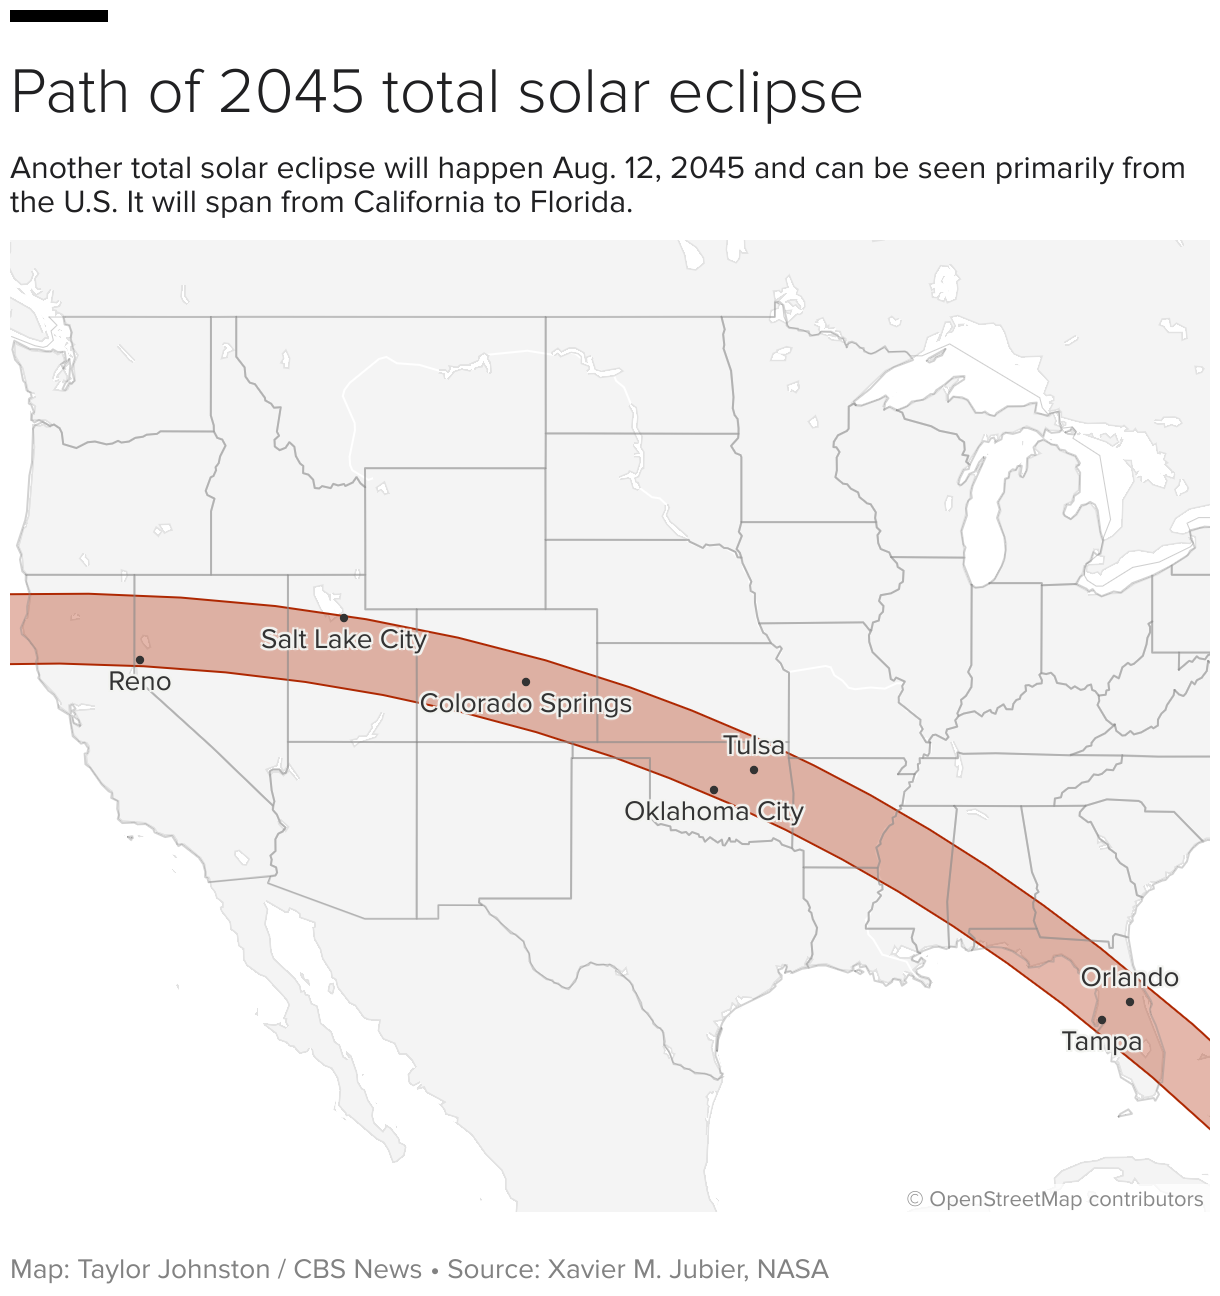 Map of the United States showing the path of the 2045 solar eclipse.